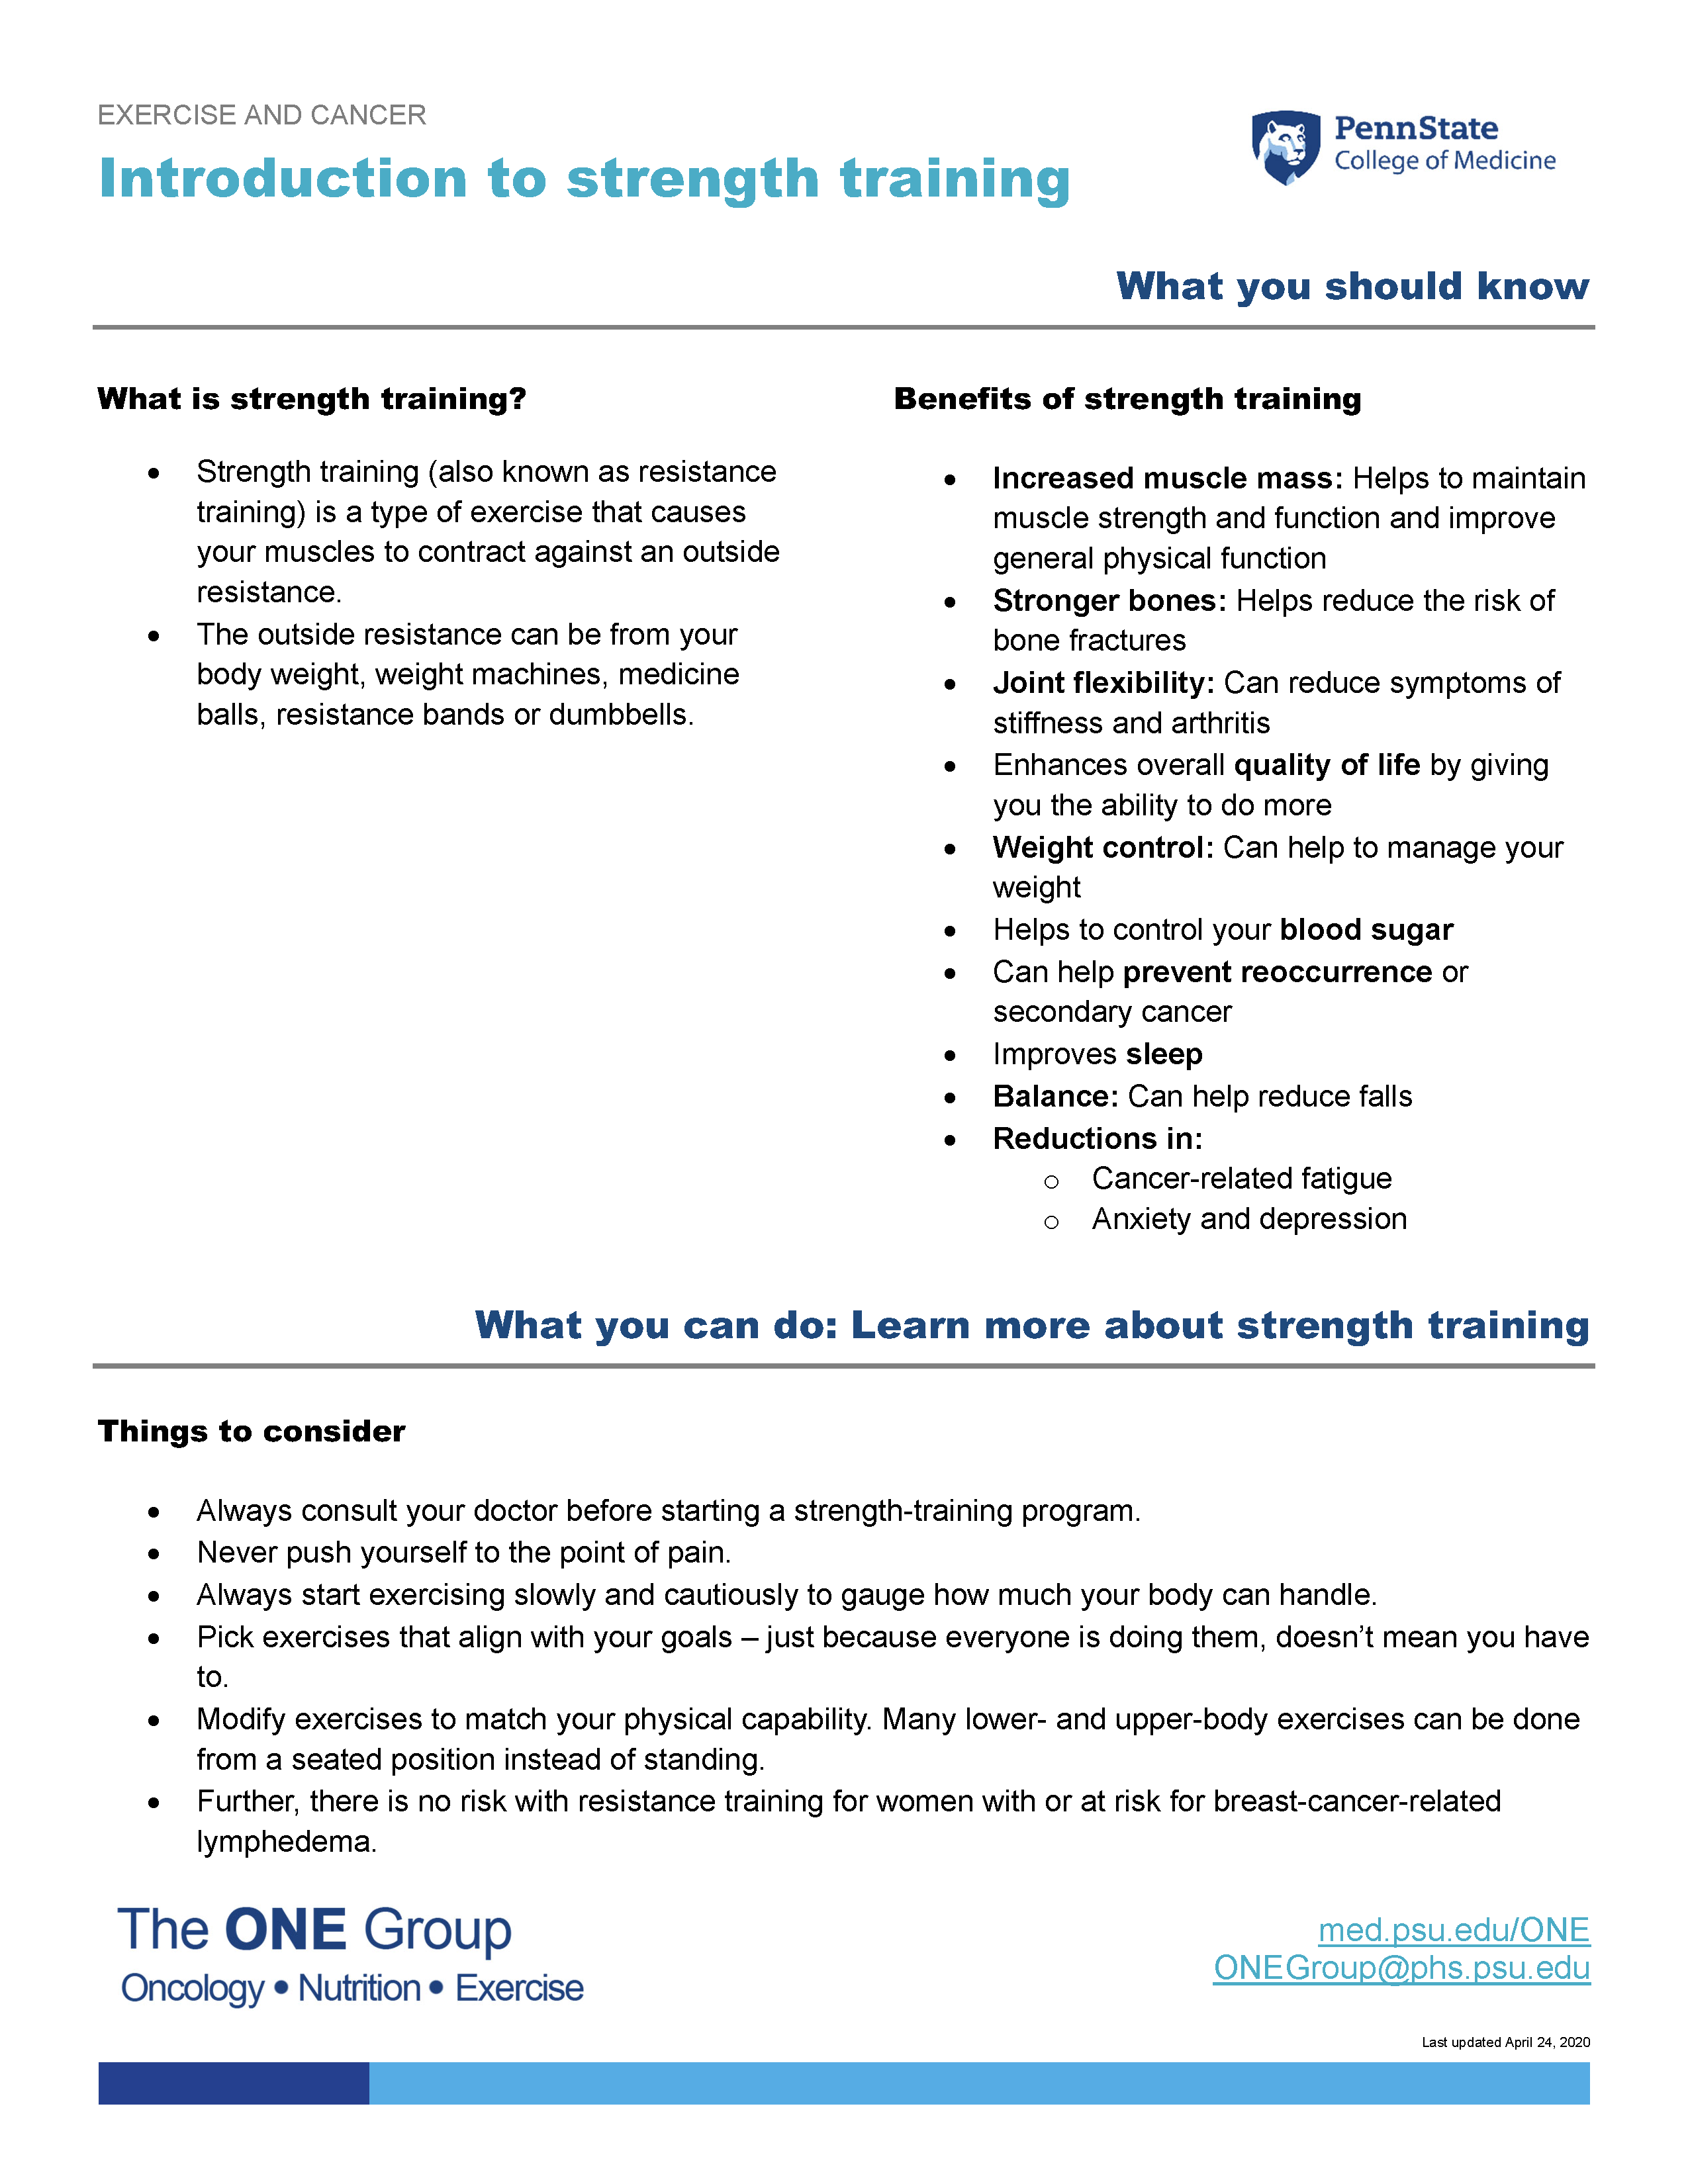 The introduction to strength training guide from The ONE Group includes the information on this page, formatted for print.